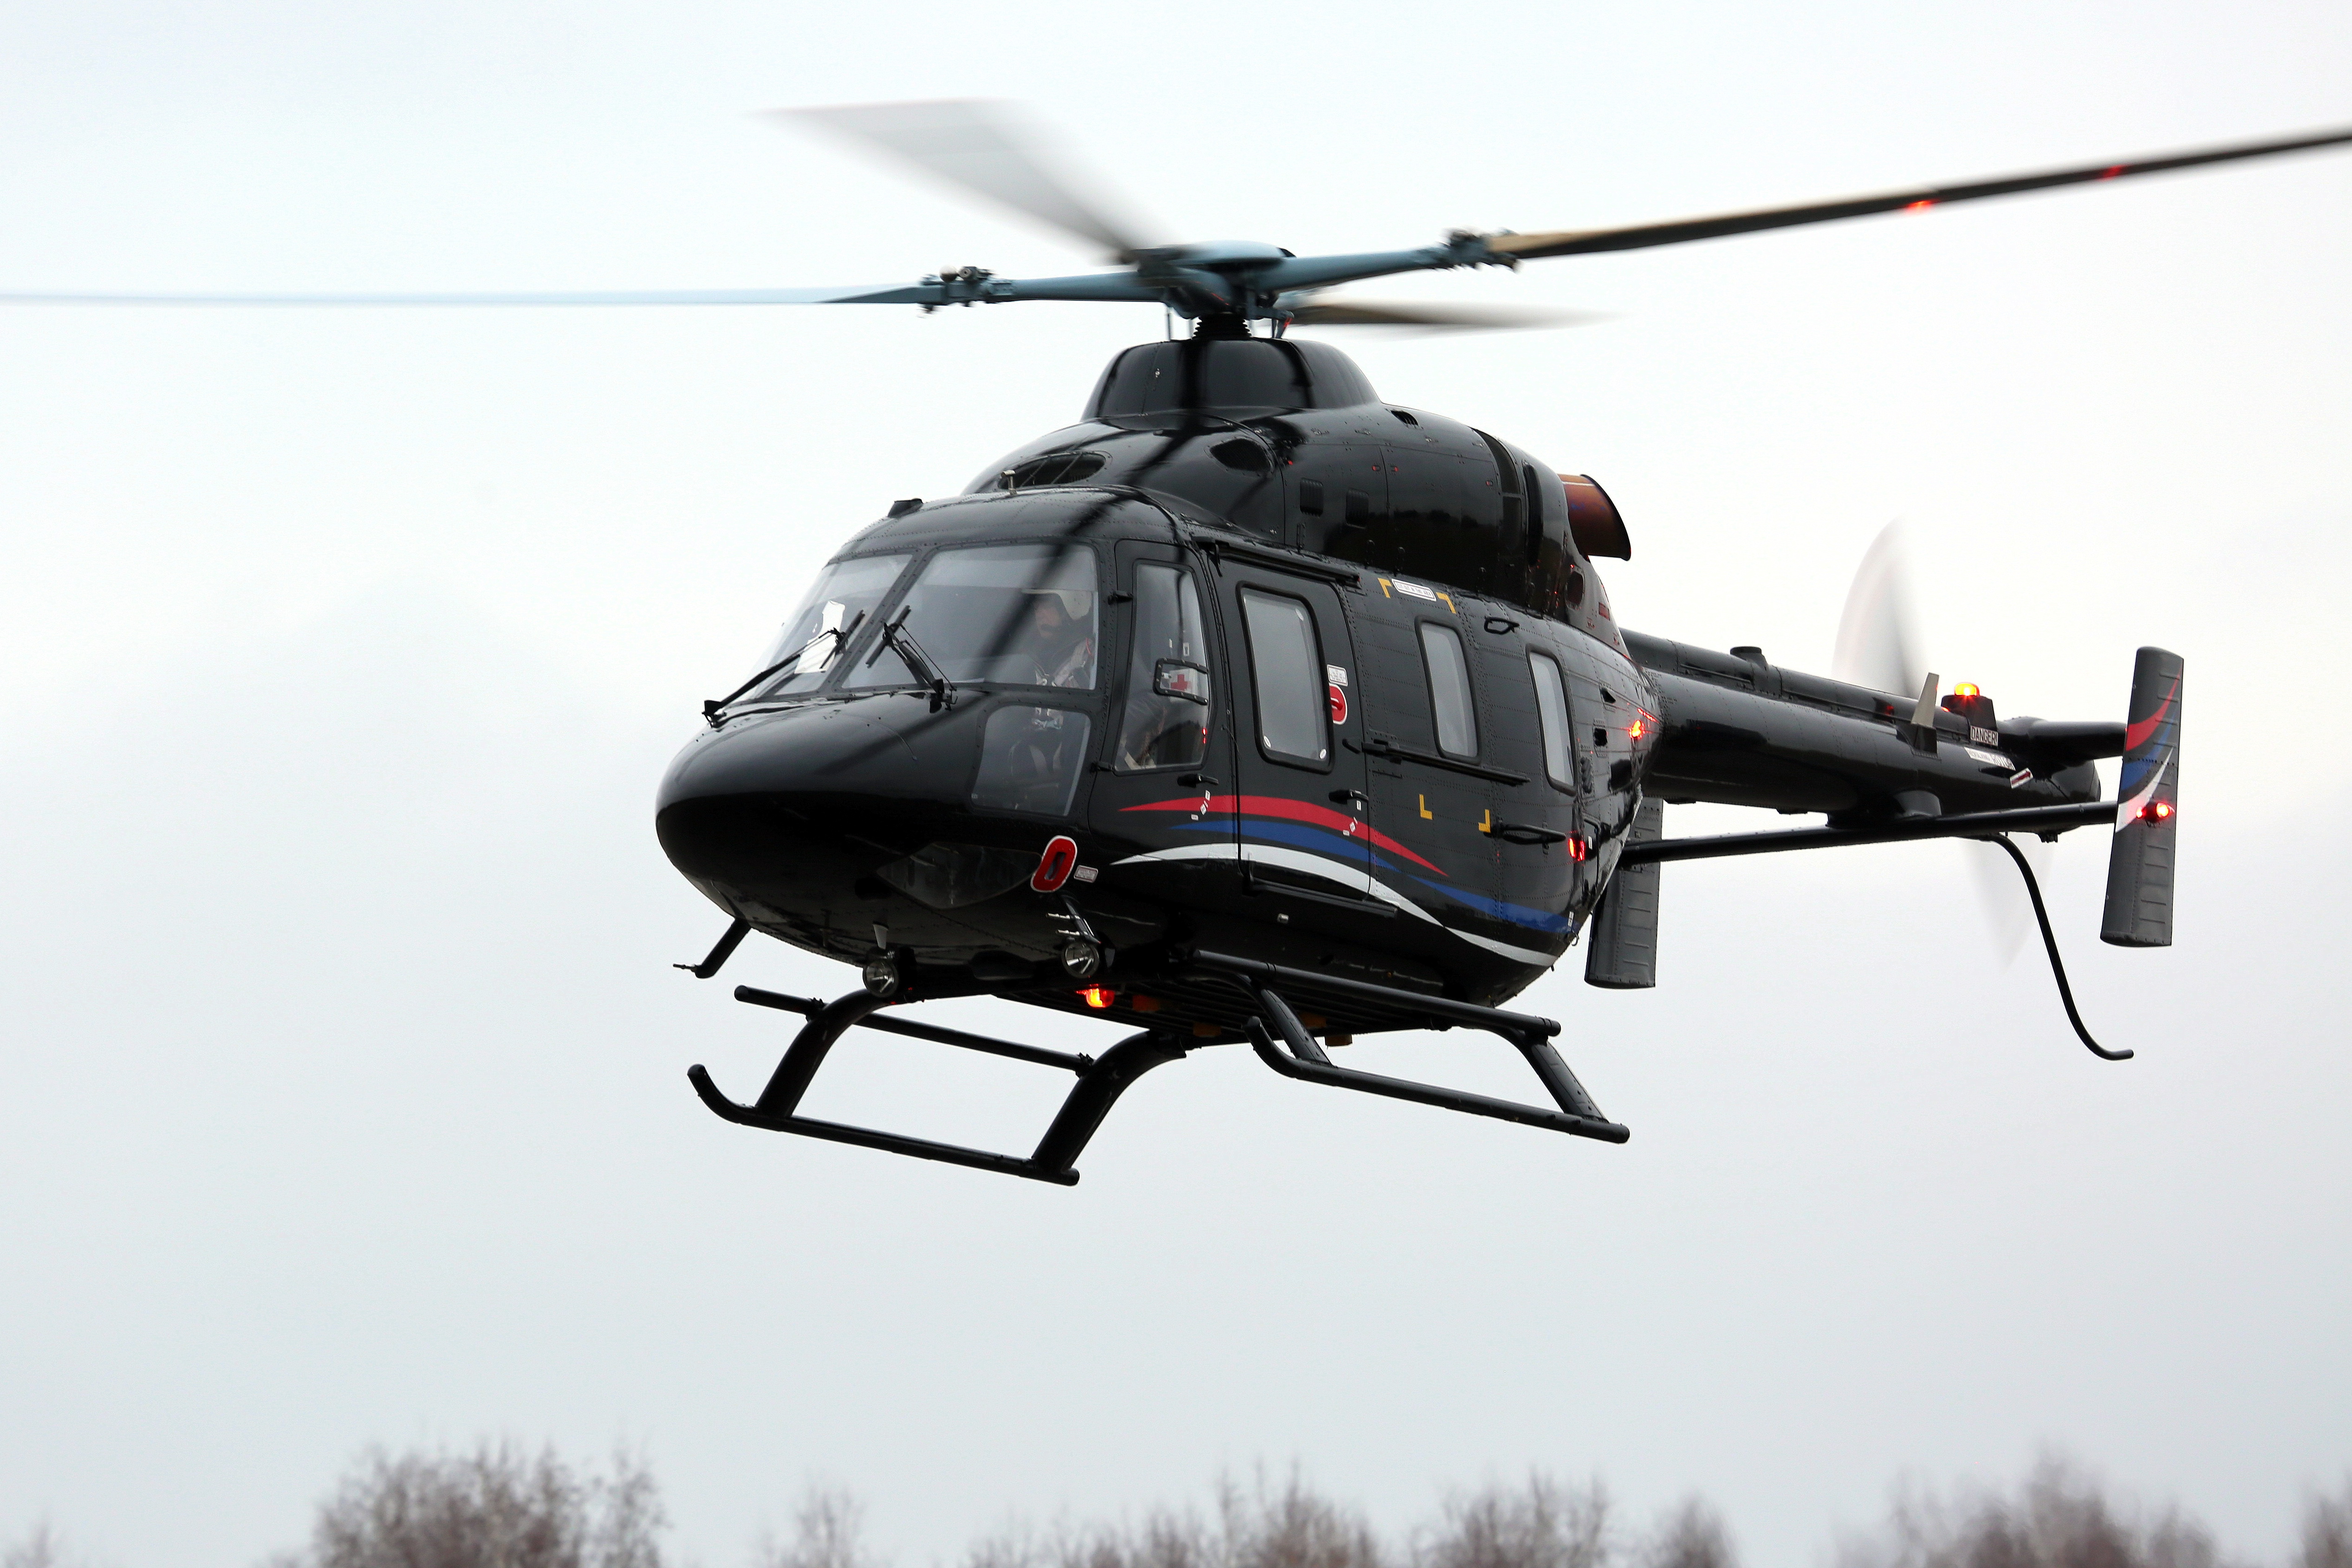 Russian Helicopters Delivers First “Ansat” to European Customer